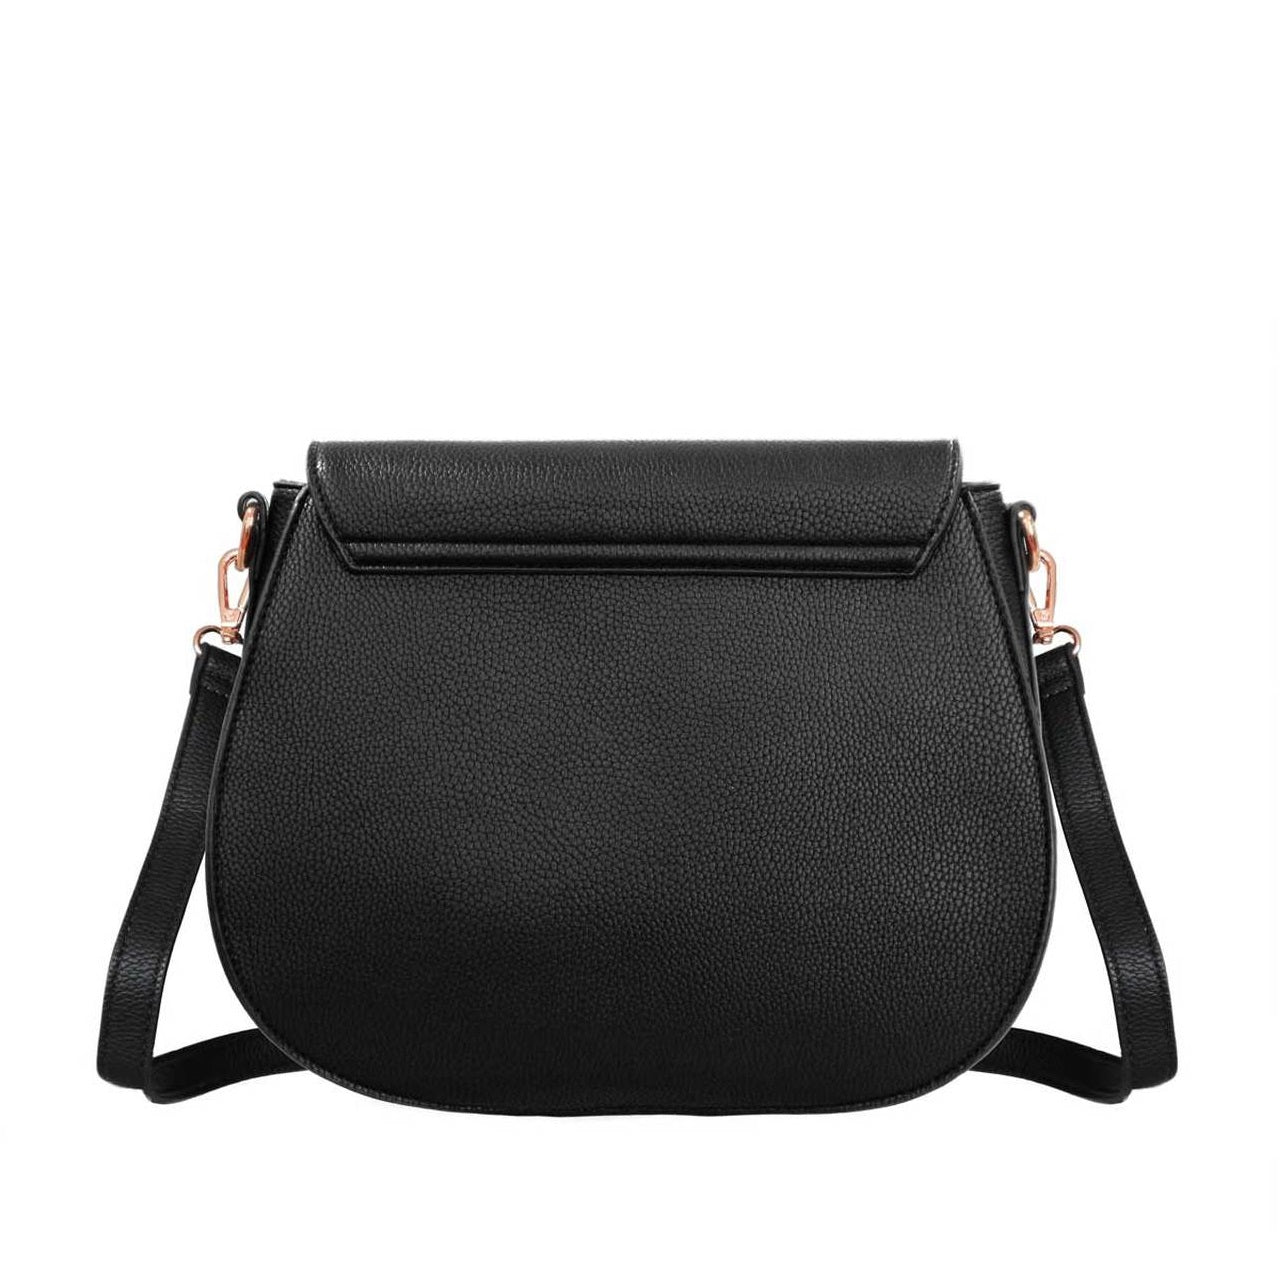 Tipperary Crystal Savoy Large Satchel Bag Black (Rose gold hardware)  This stylish new addition to our bag collection is proving to be very popular, with an outside zip compartment the Savoy bag is stylish and functional.